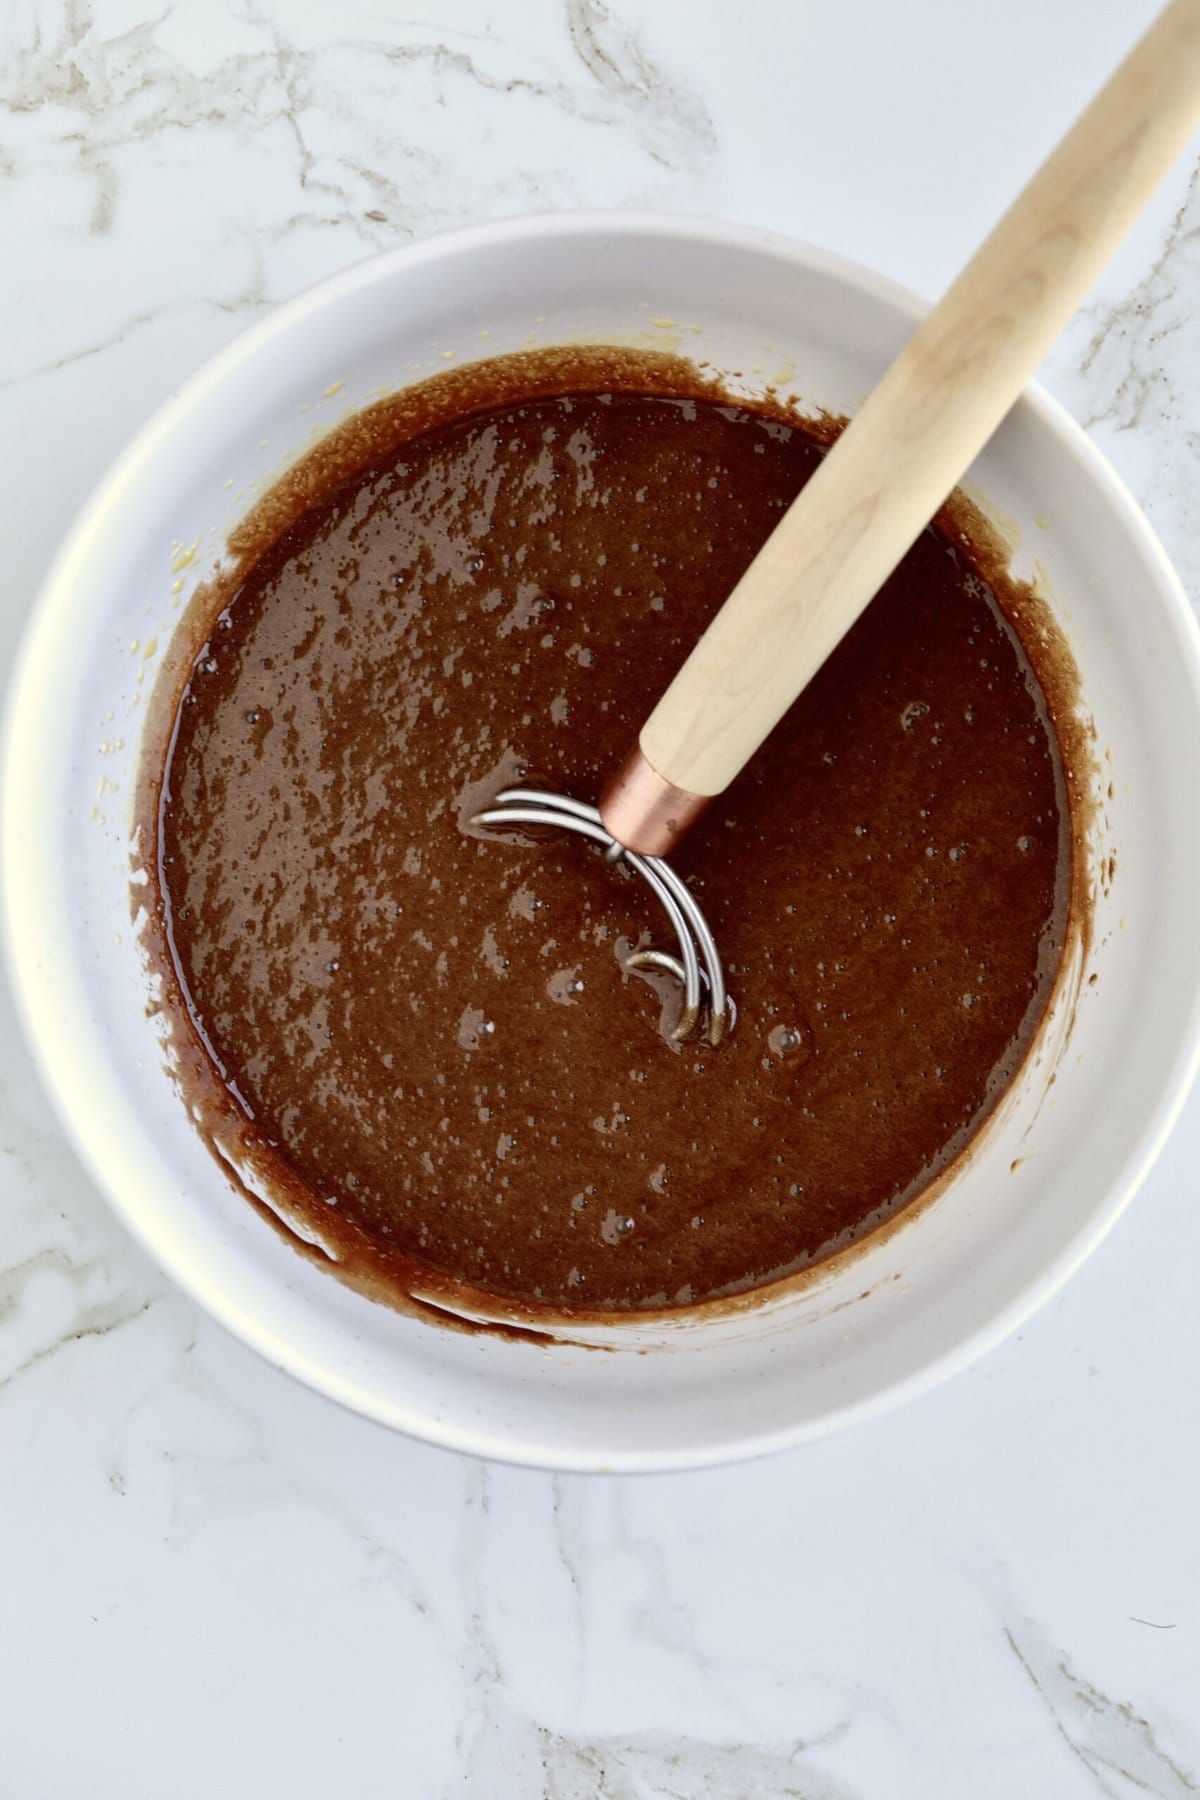 How to make chocolate olive oil cake step-by-step photos- adding the chocolate espresso mixture to the bowl with eggs mixture.